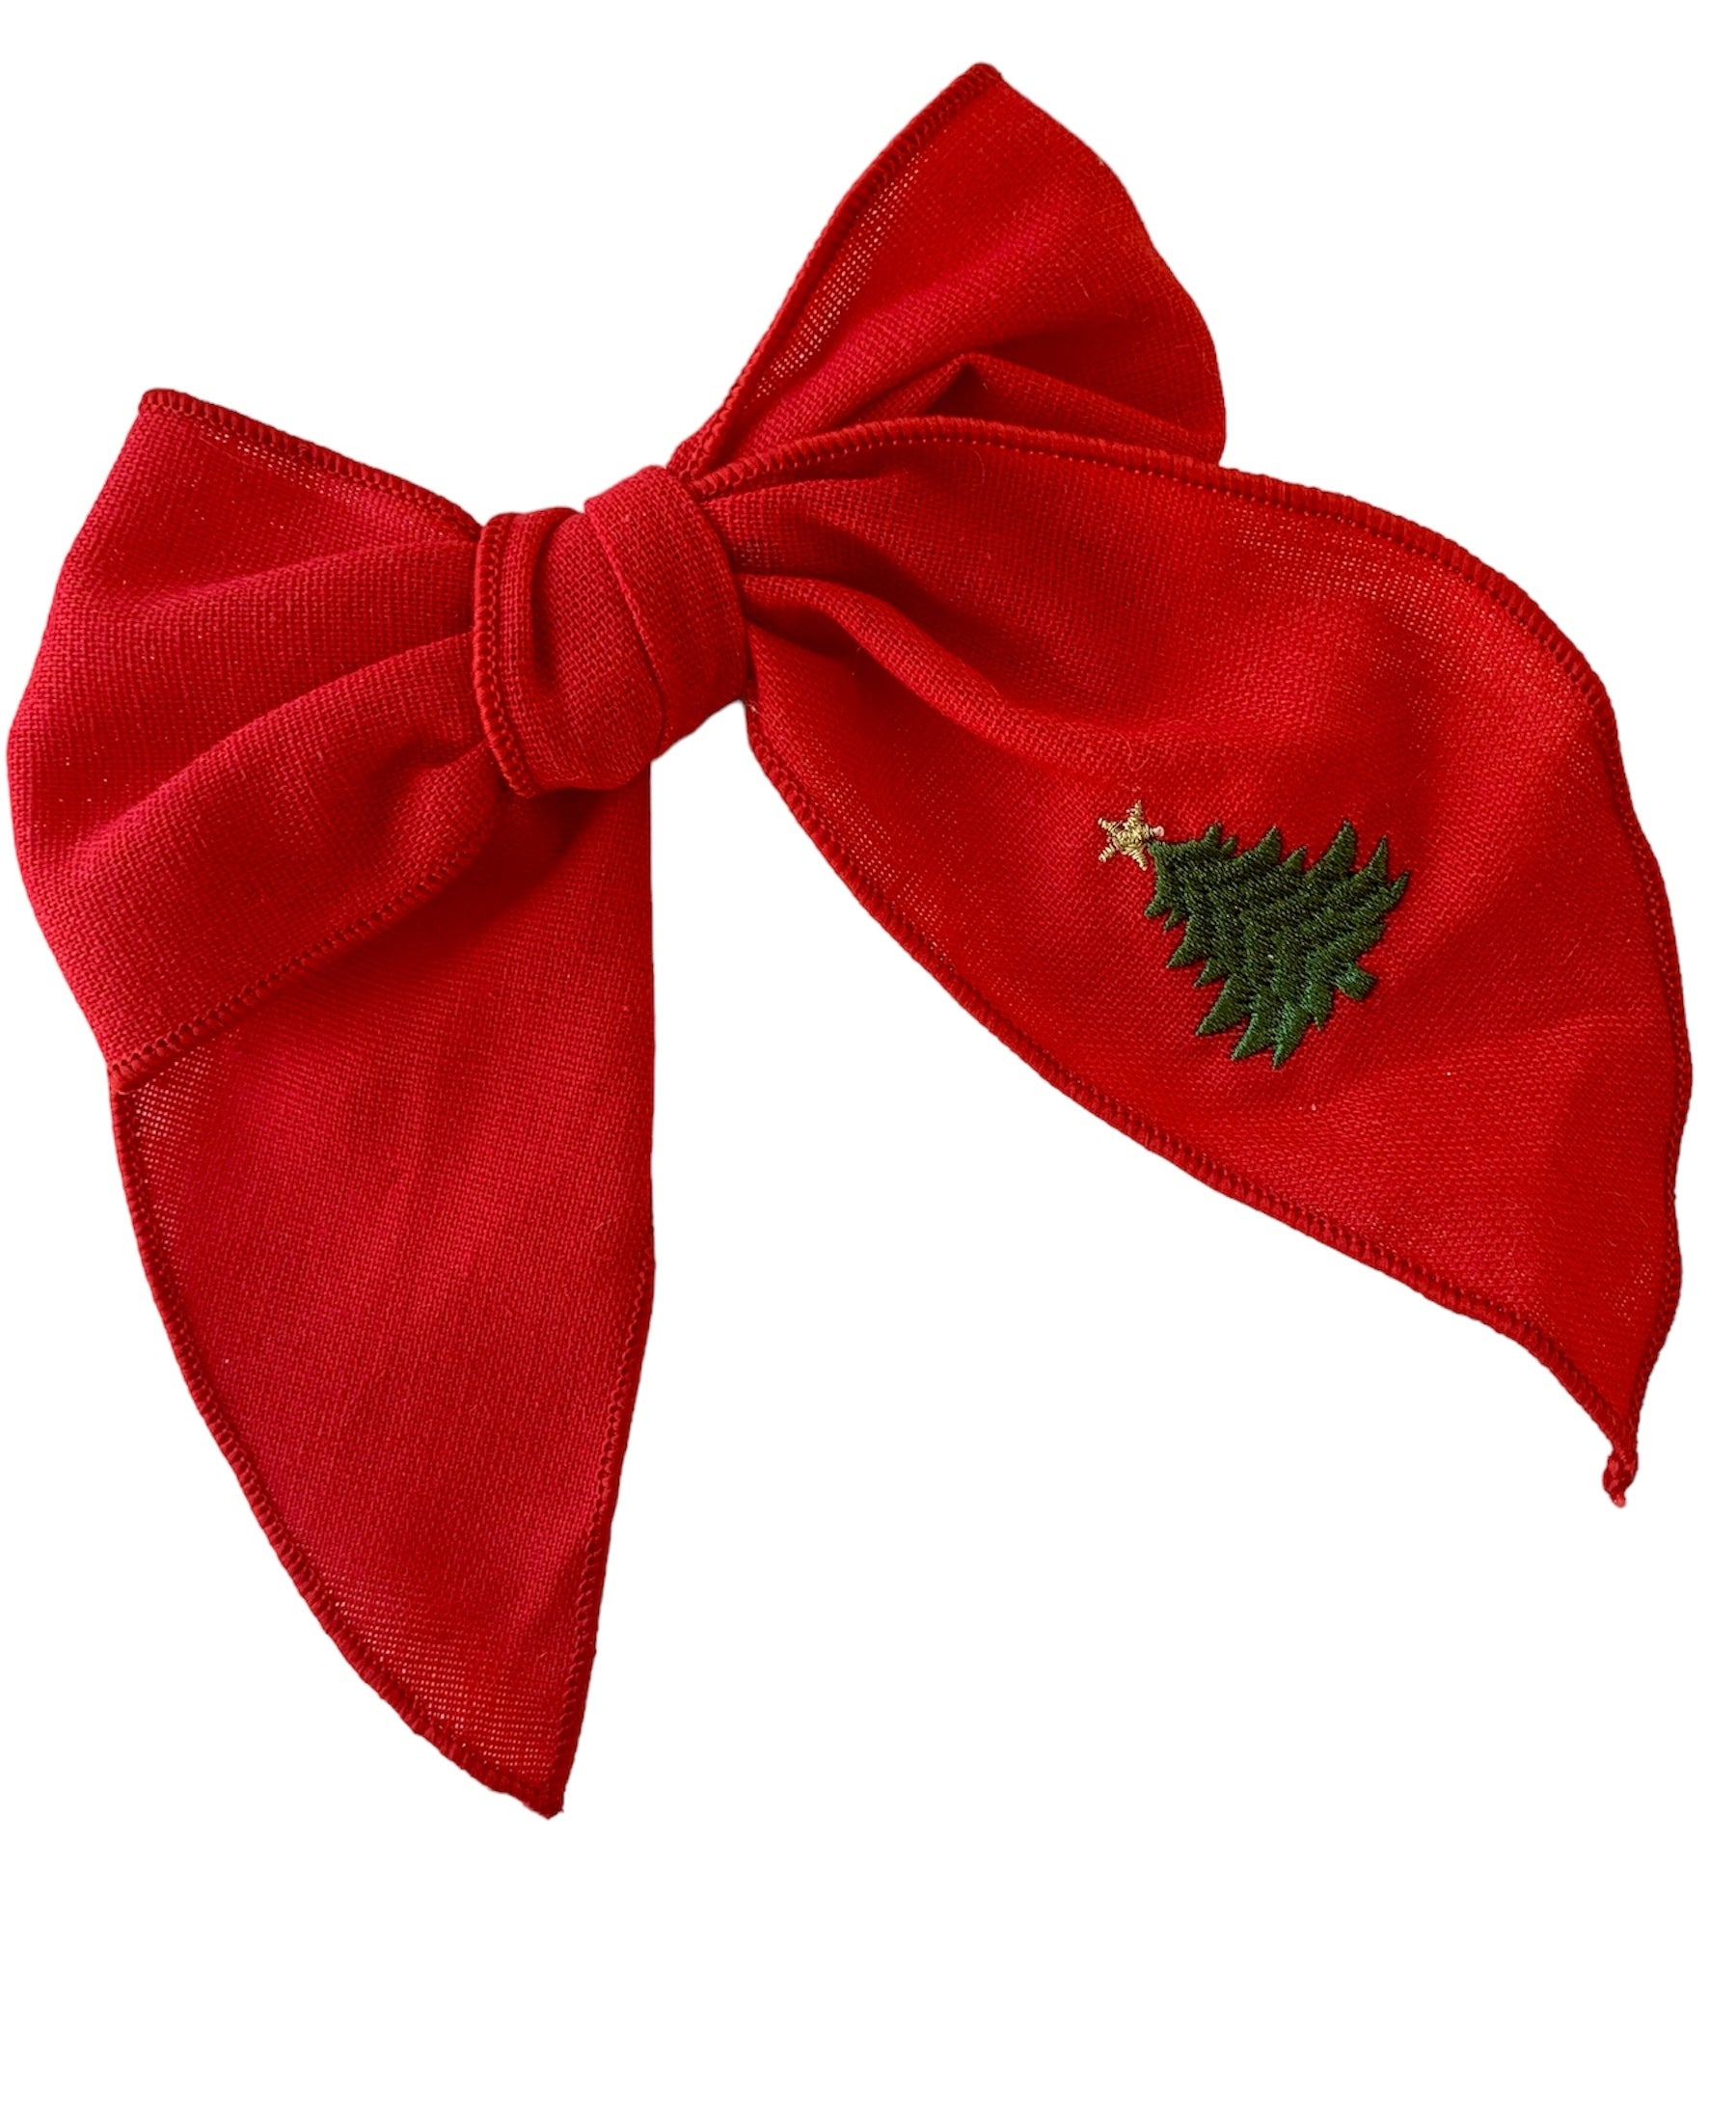 Large Red Ribbon Pull Bows - 9 inch Wide, Set of 6, 4th of July, Christmas, Gift Bows